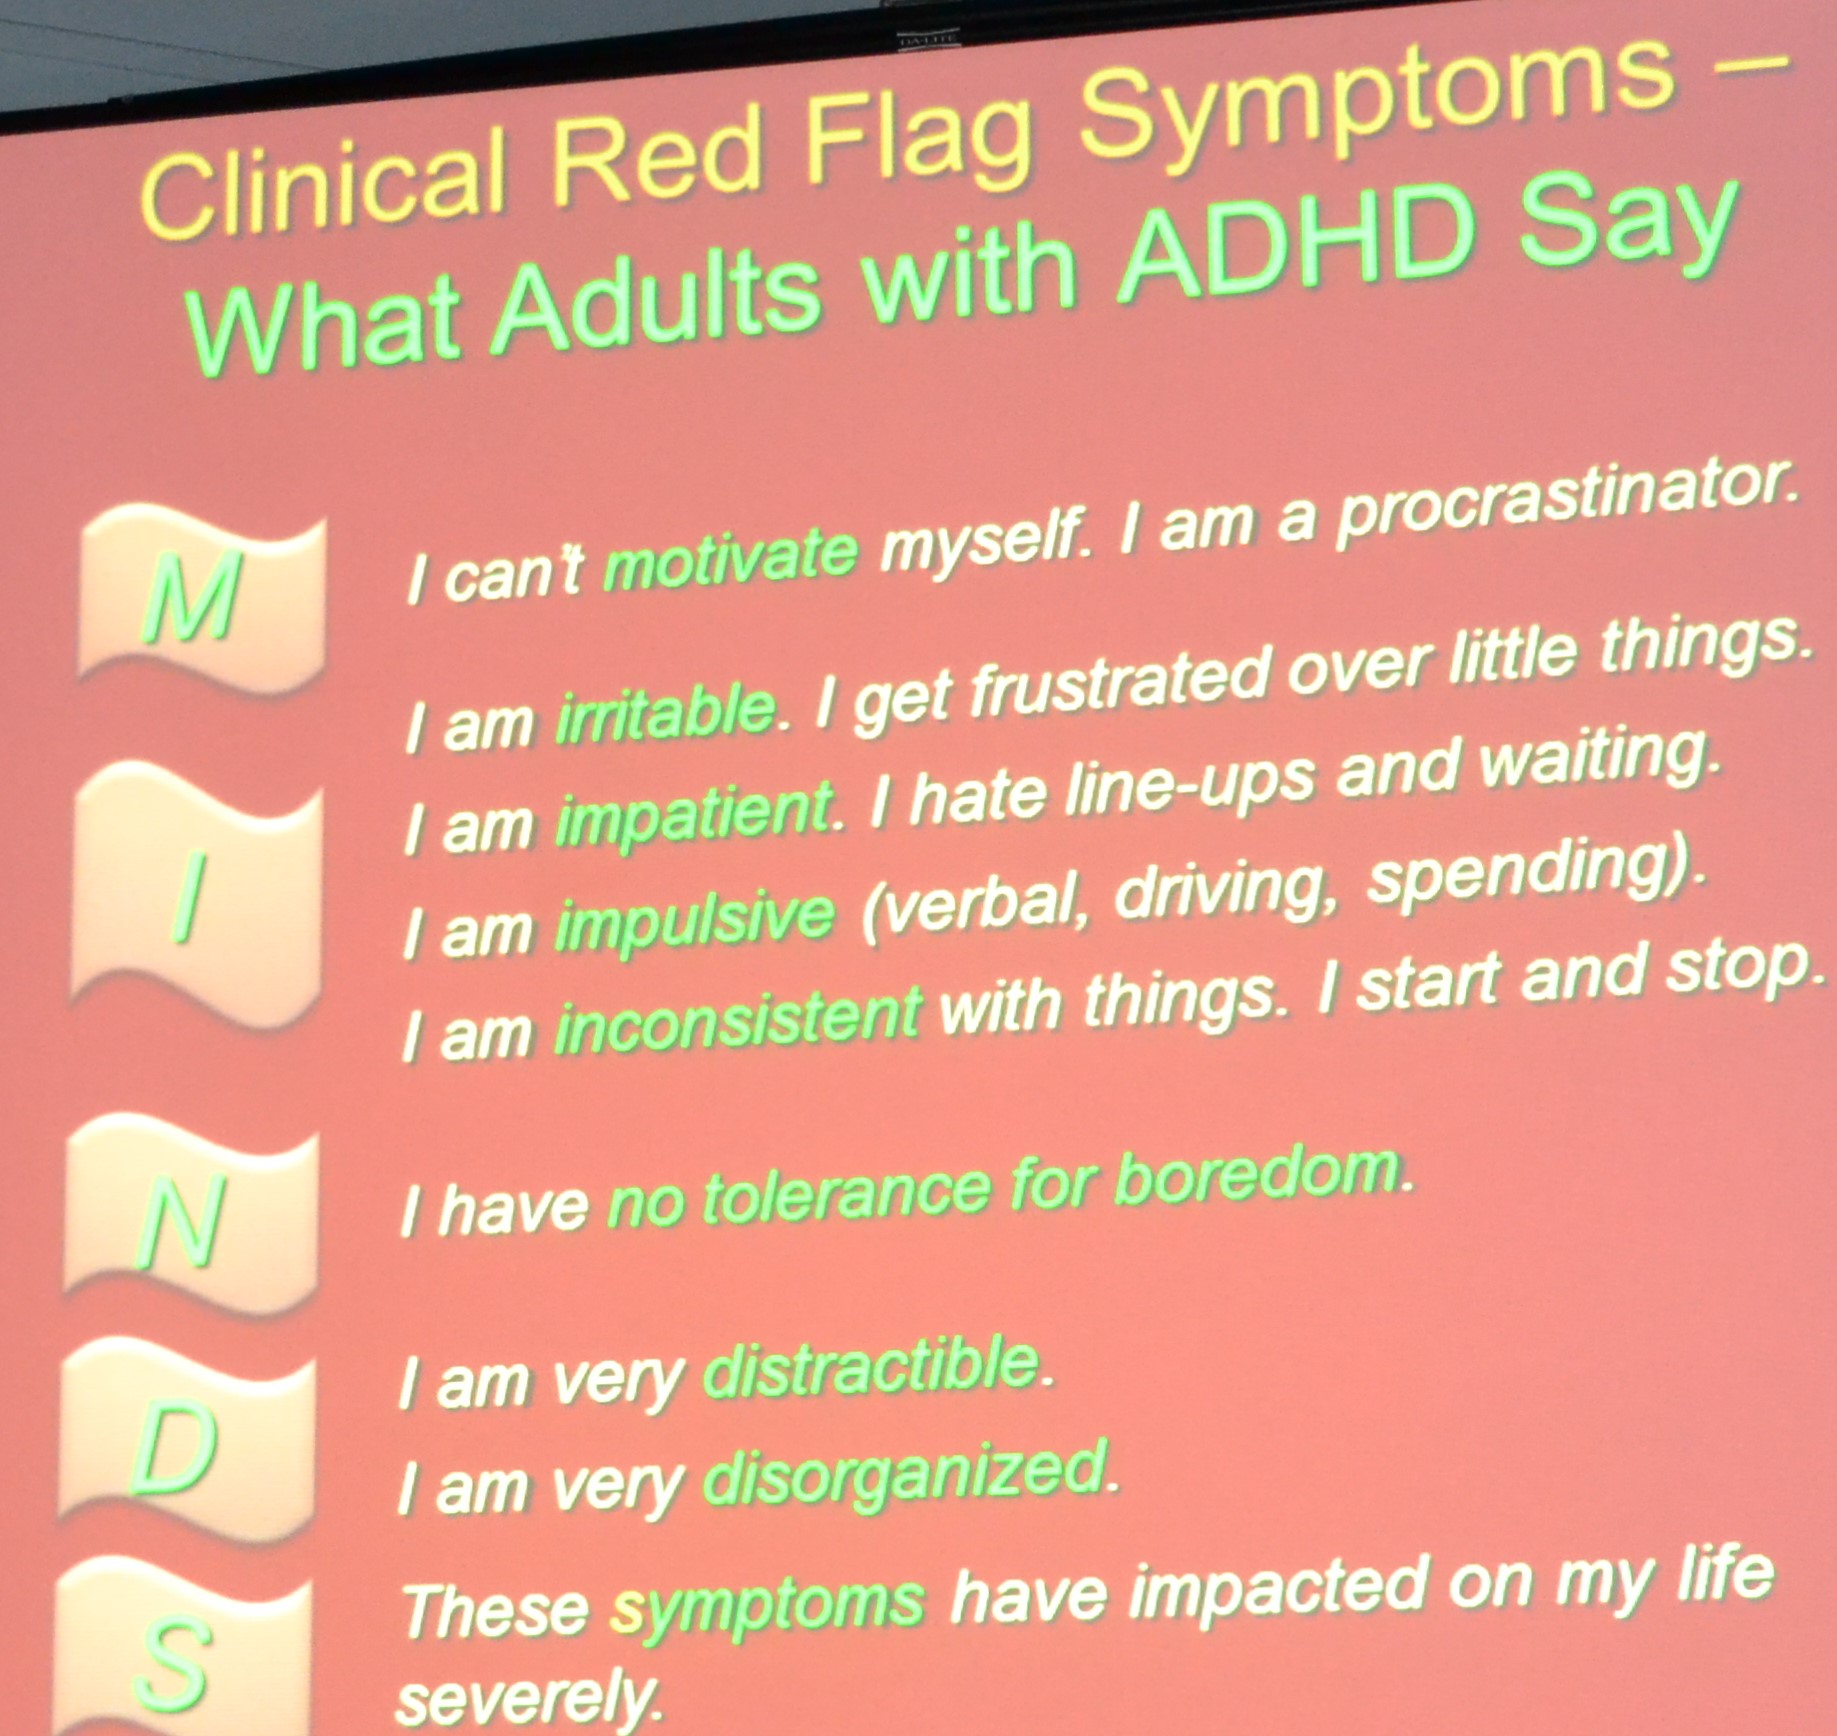 the red flag symptoms what ADHD adults say